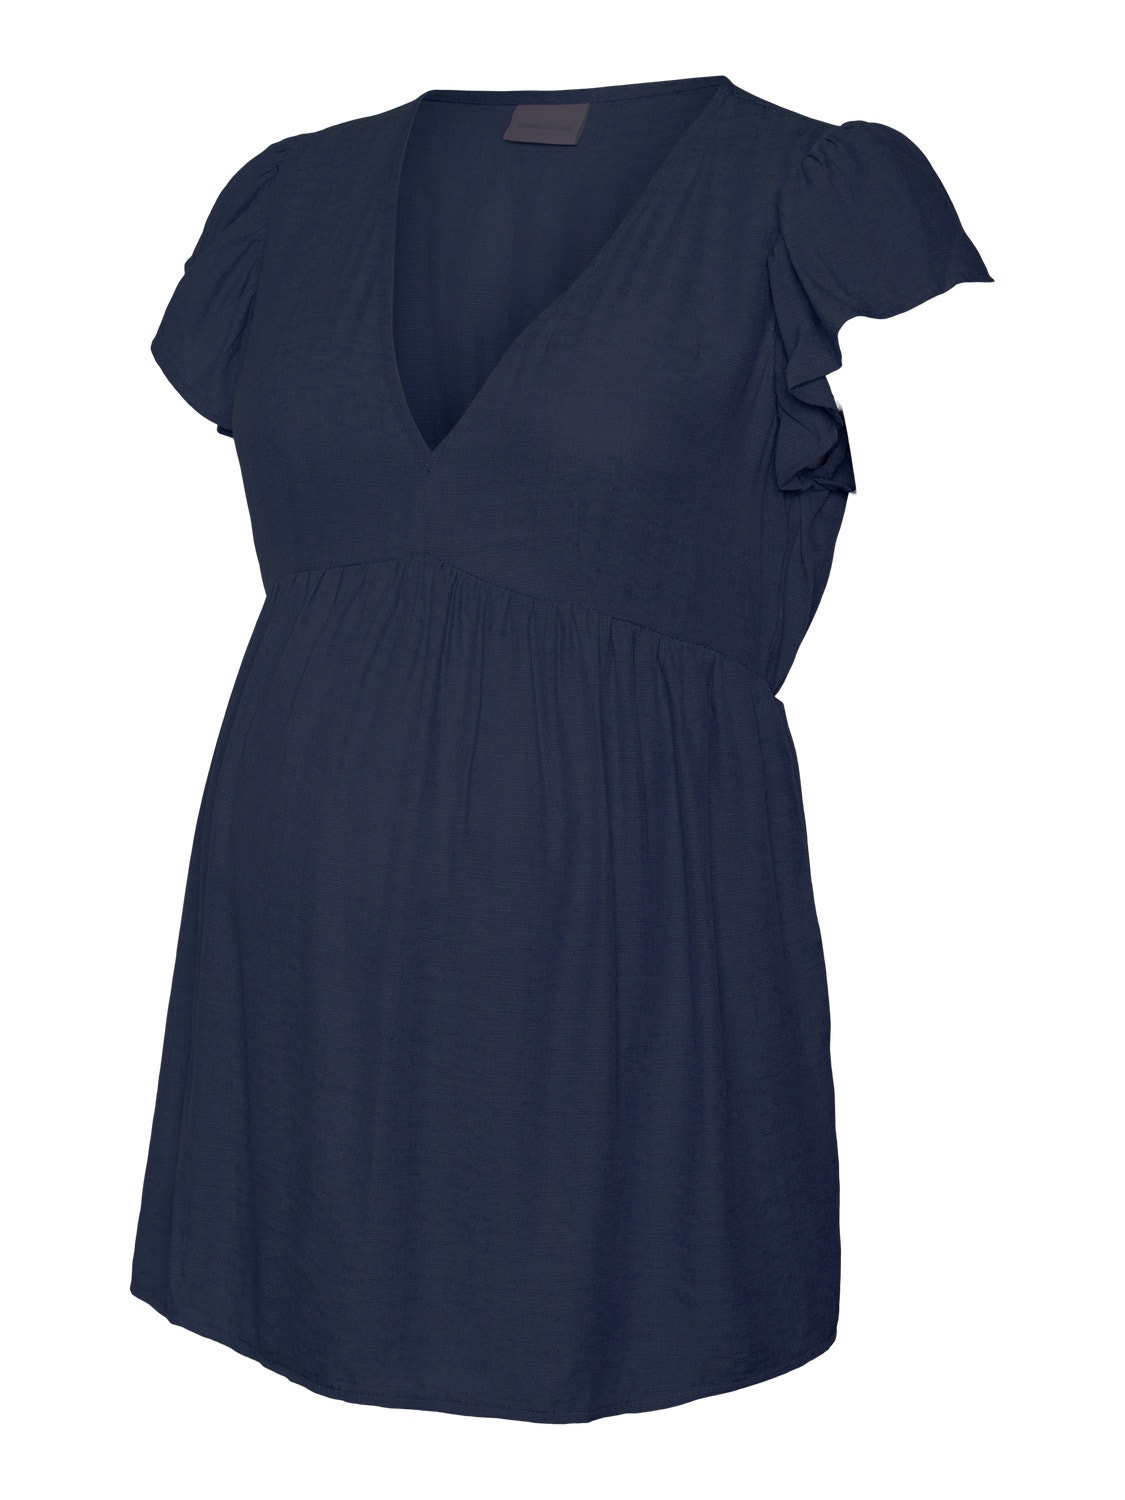 MAMA.LICIOUS Maternity-top -Medieval Blue - 20020373